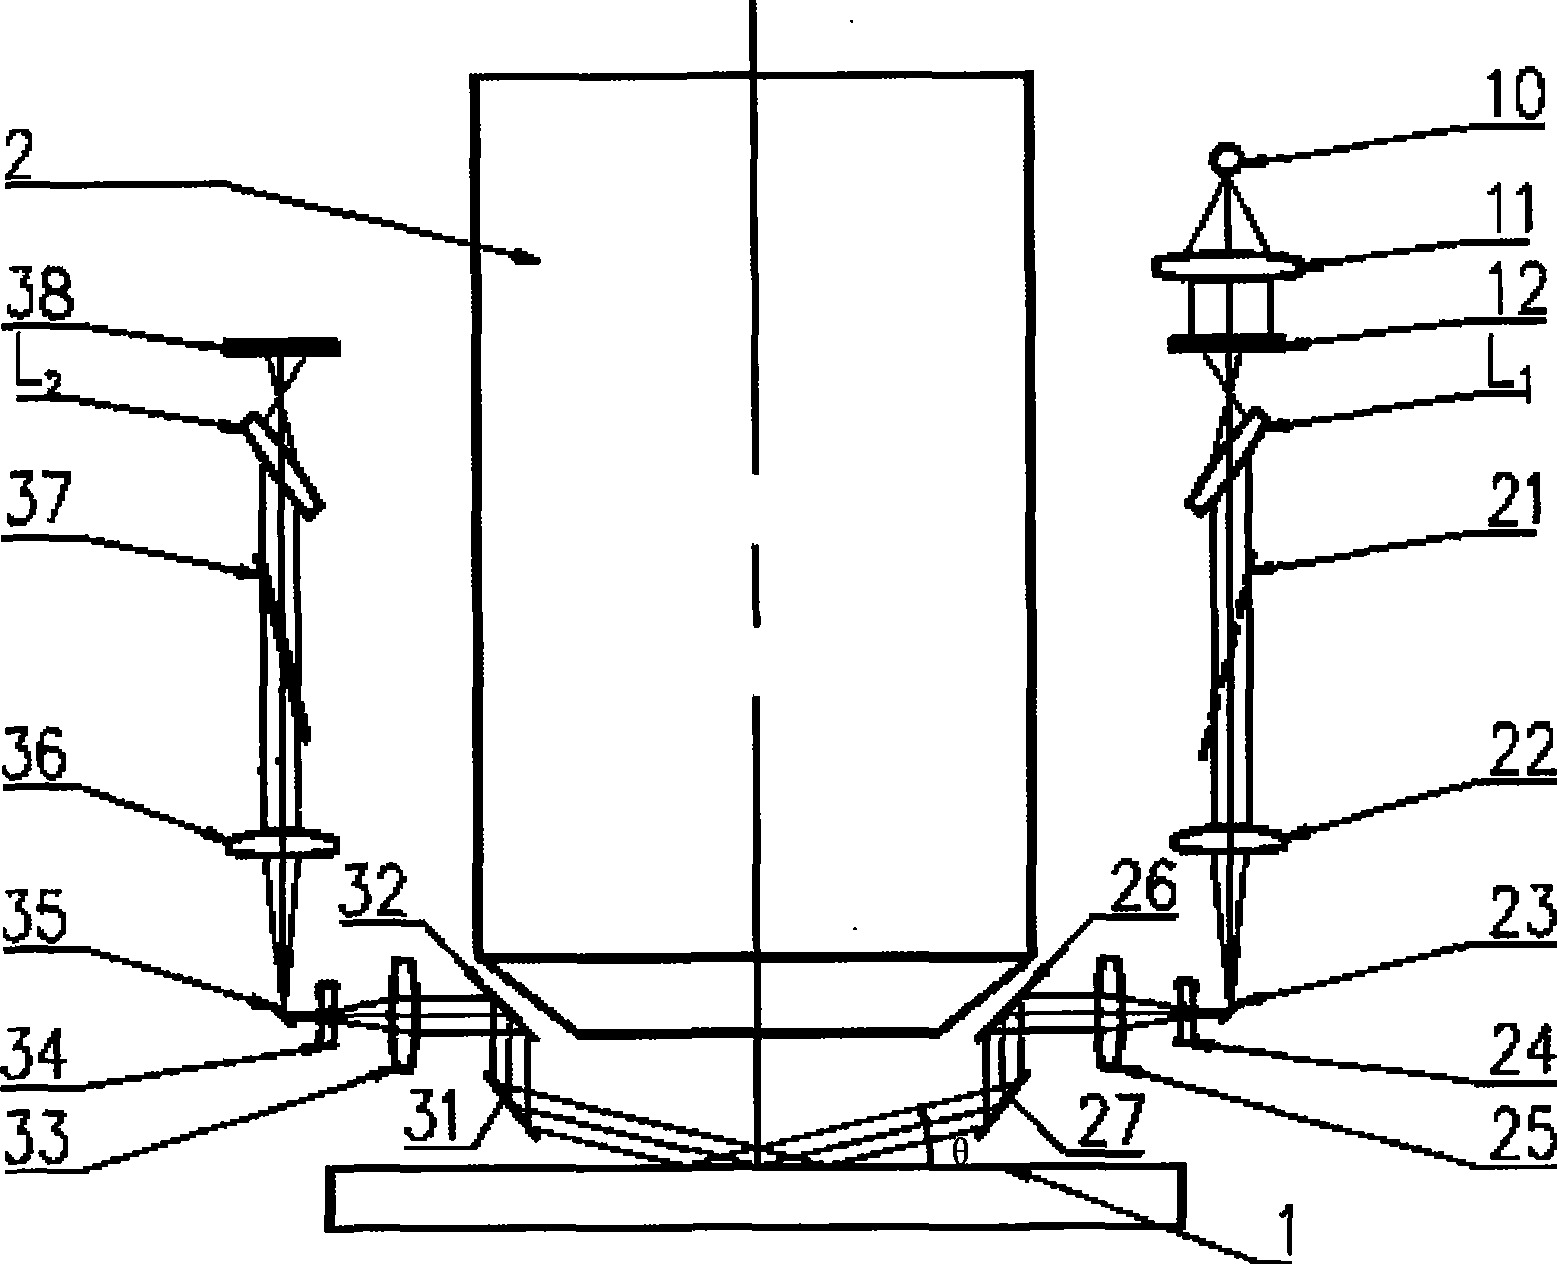 Optical system used for focusing and leveling